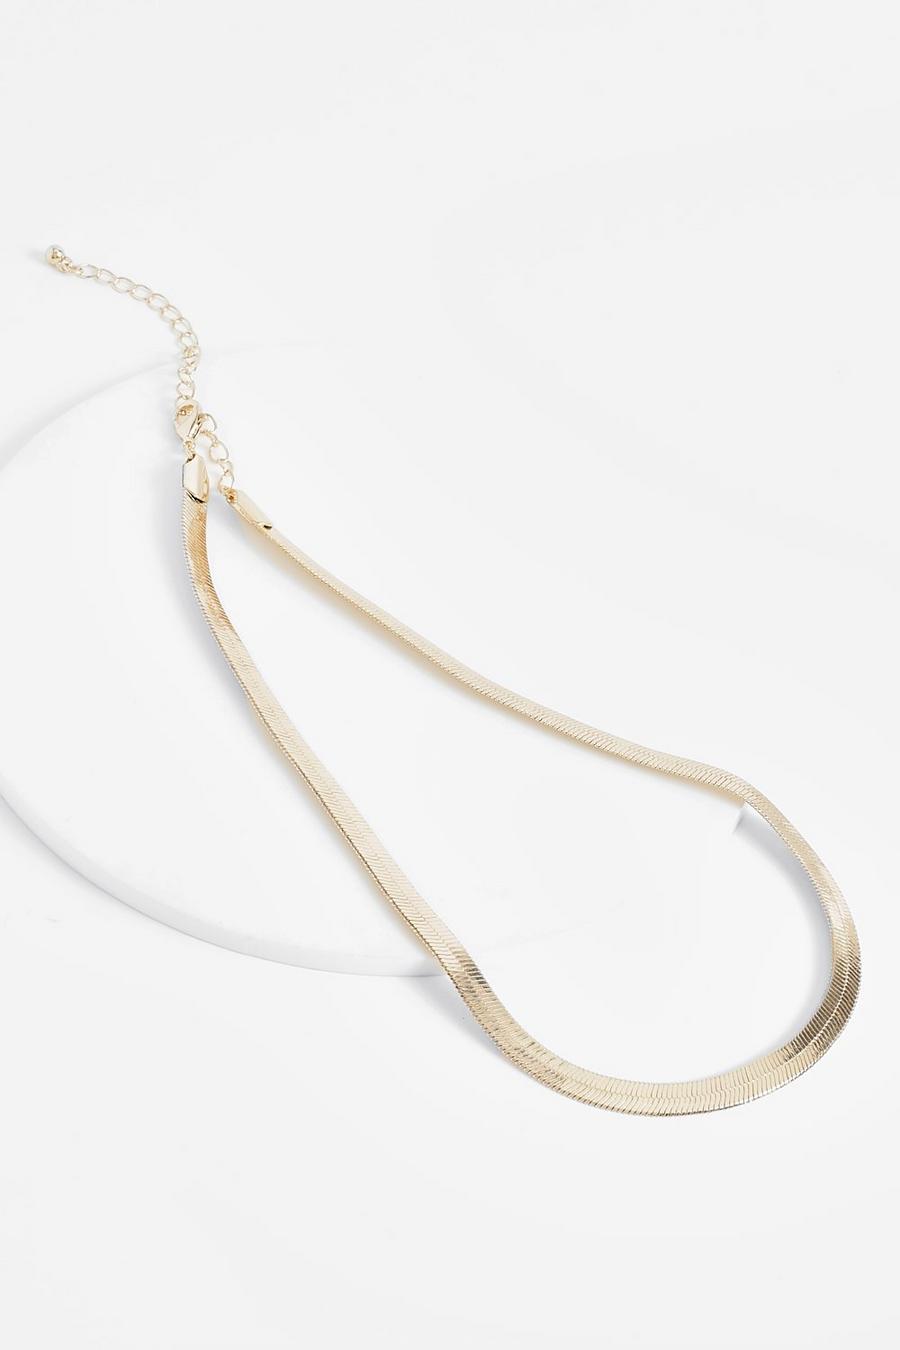 Gold metallic Snake Chain Necklace  